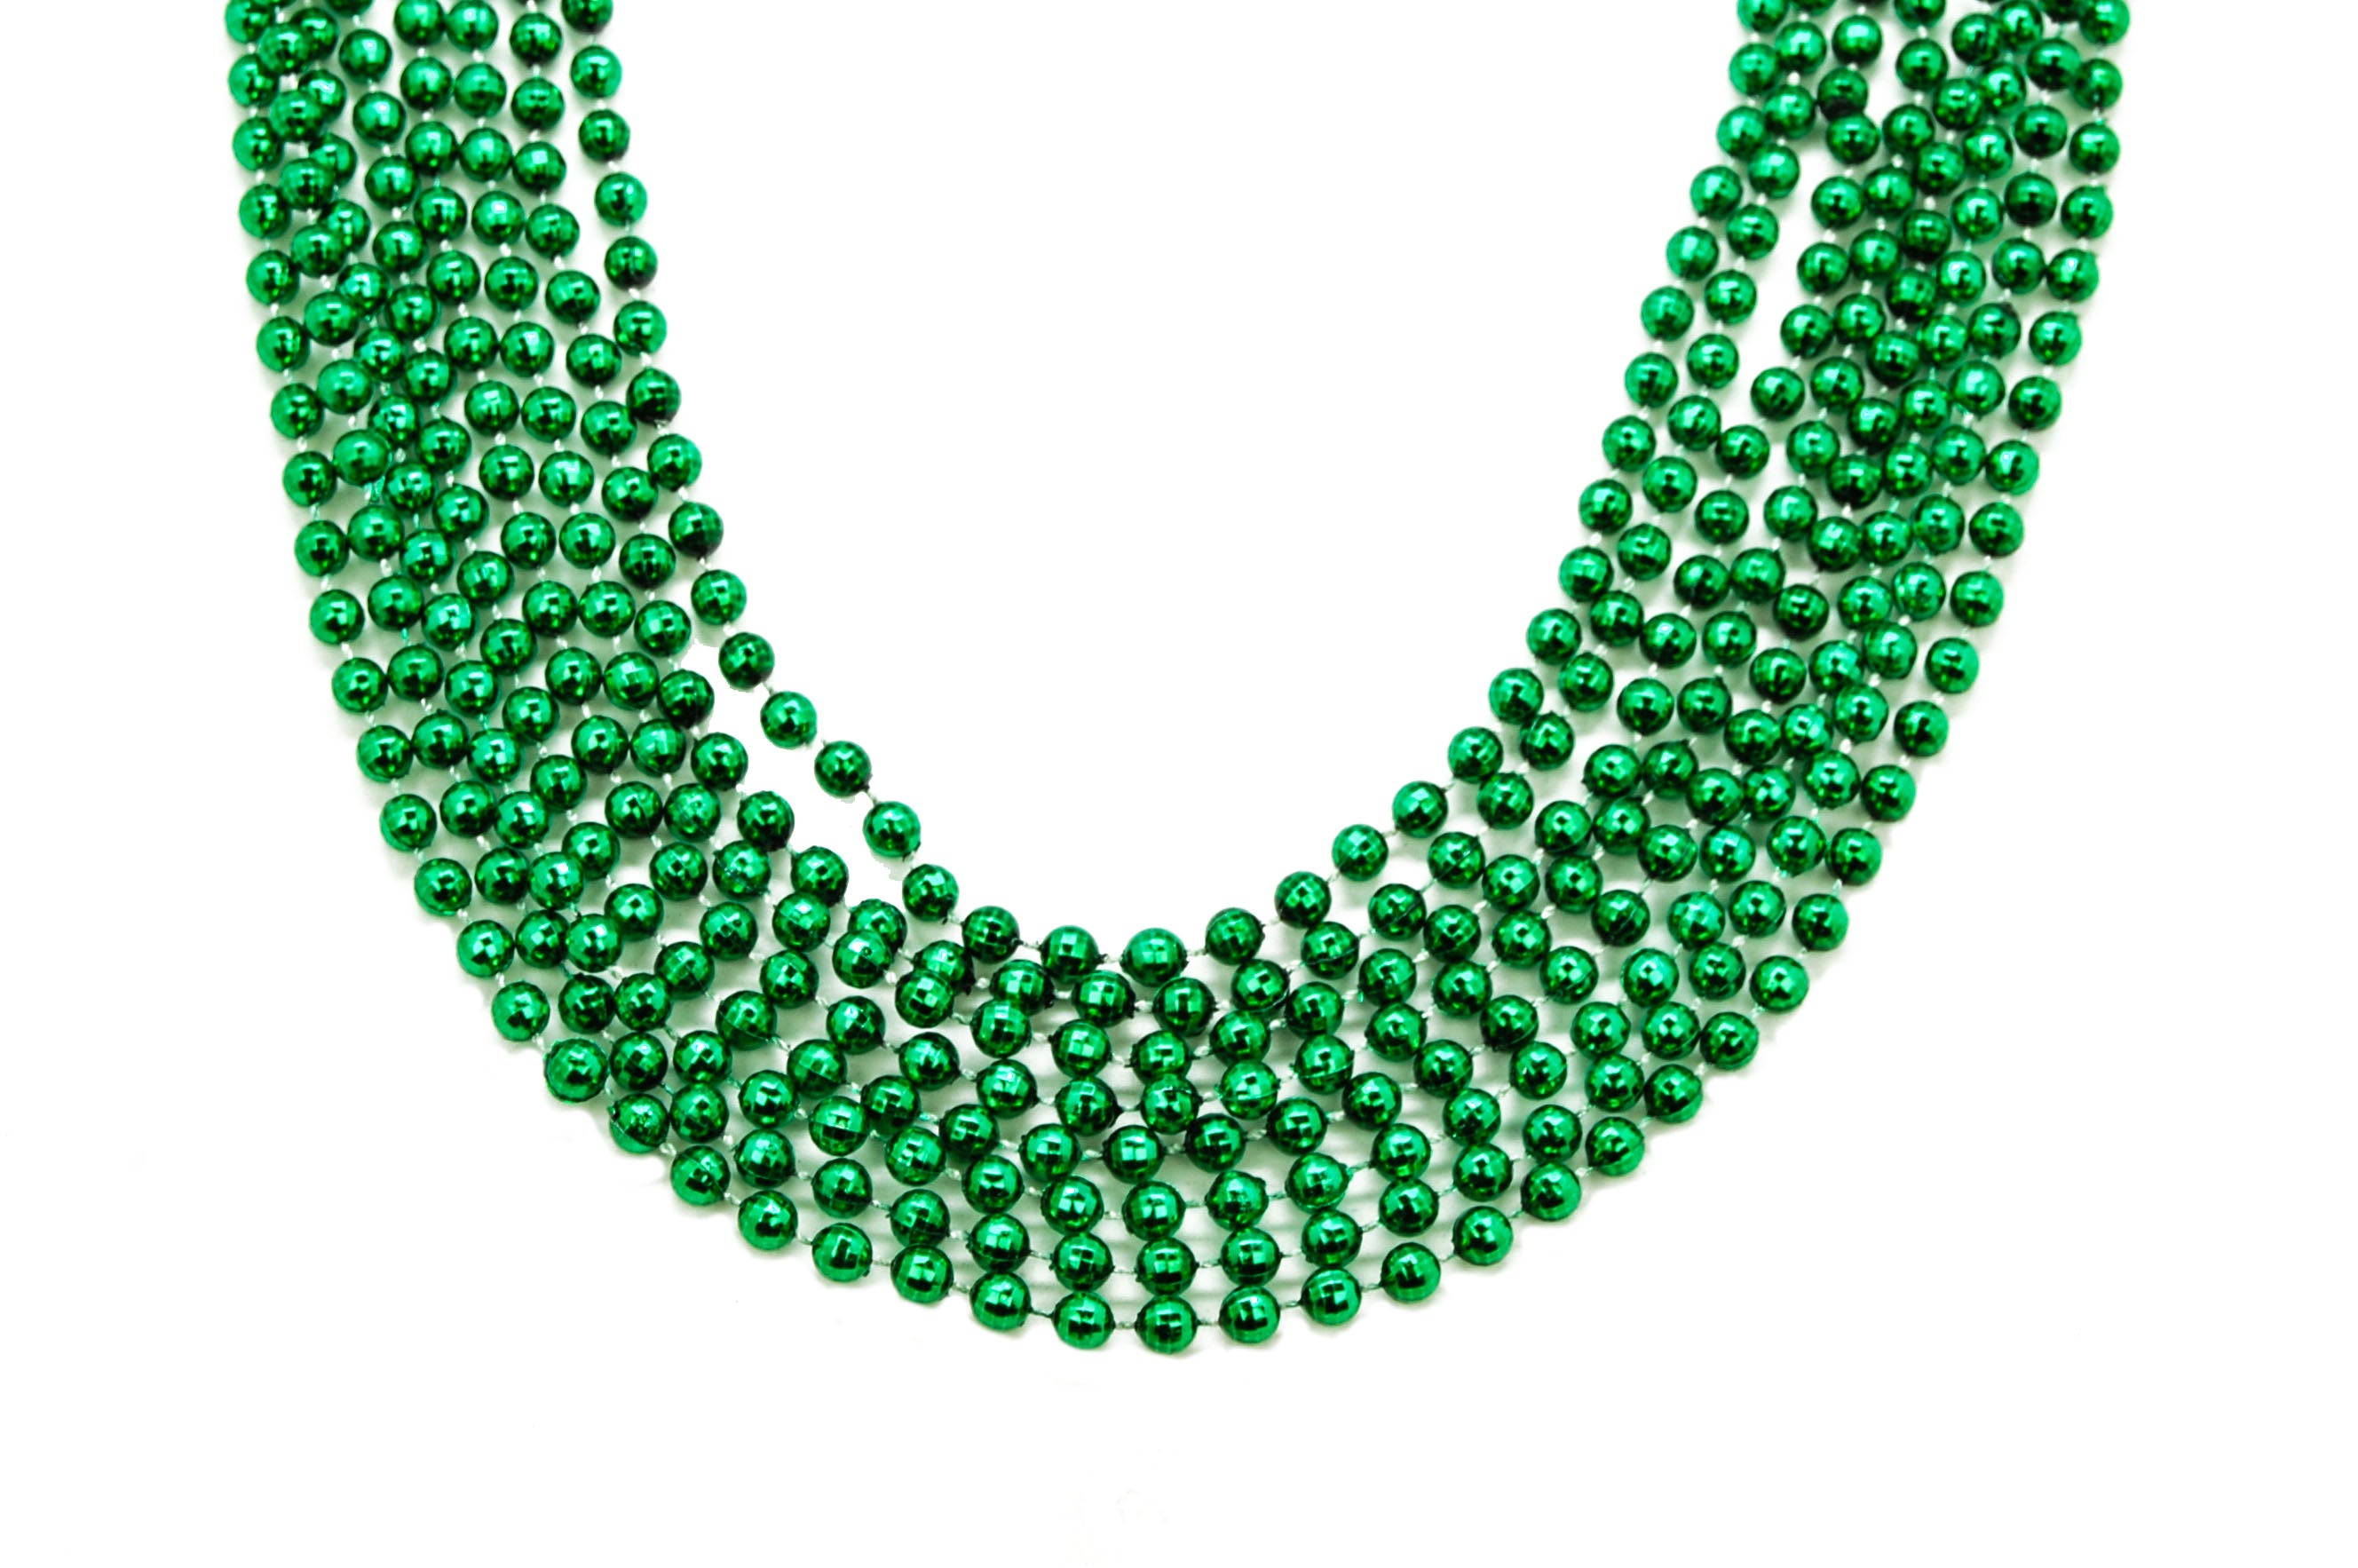 Temicle 12 Pcs 33 Mardi Gras Beads Necklace - 7mm Gold Green Purple  Plastic Bead Necklaces Bundle for Mardi Gras Throws, Party Costume, St  Patrick's